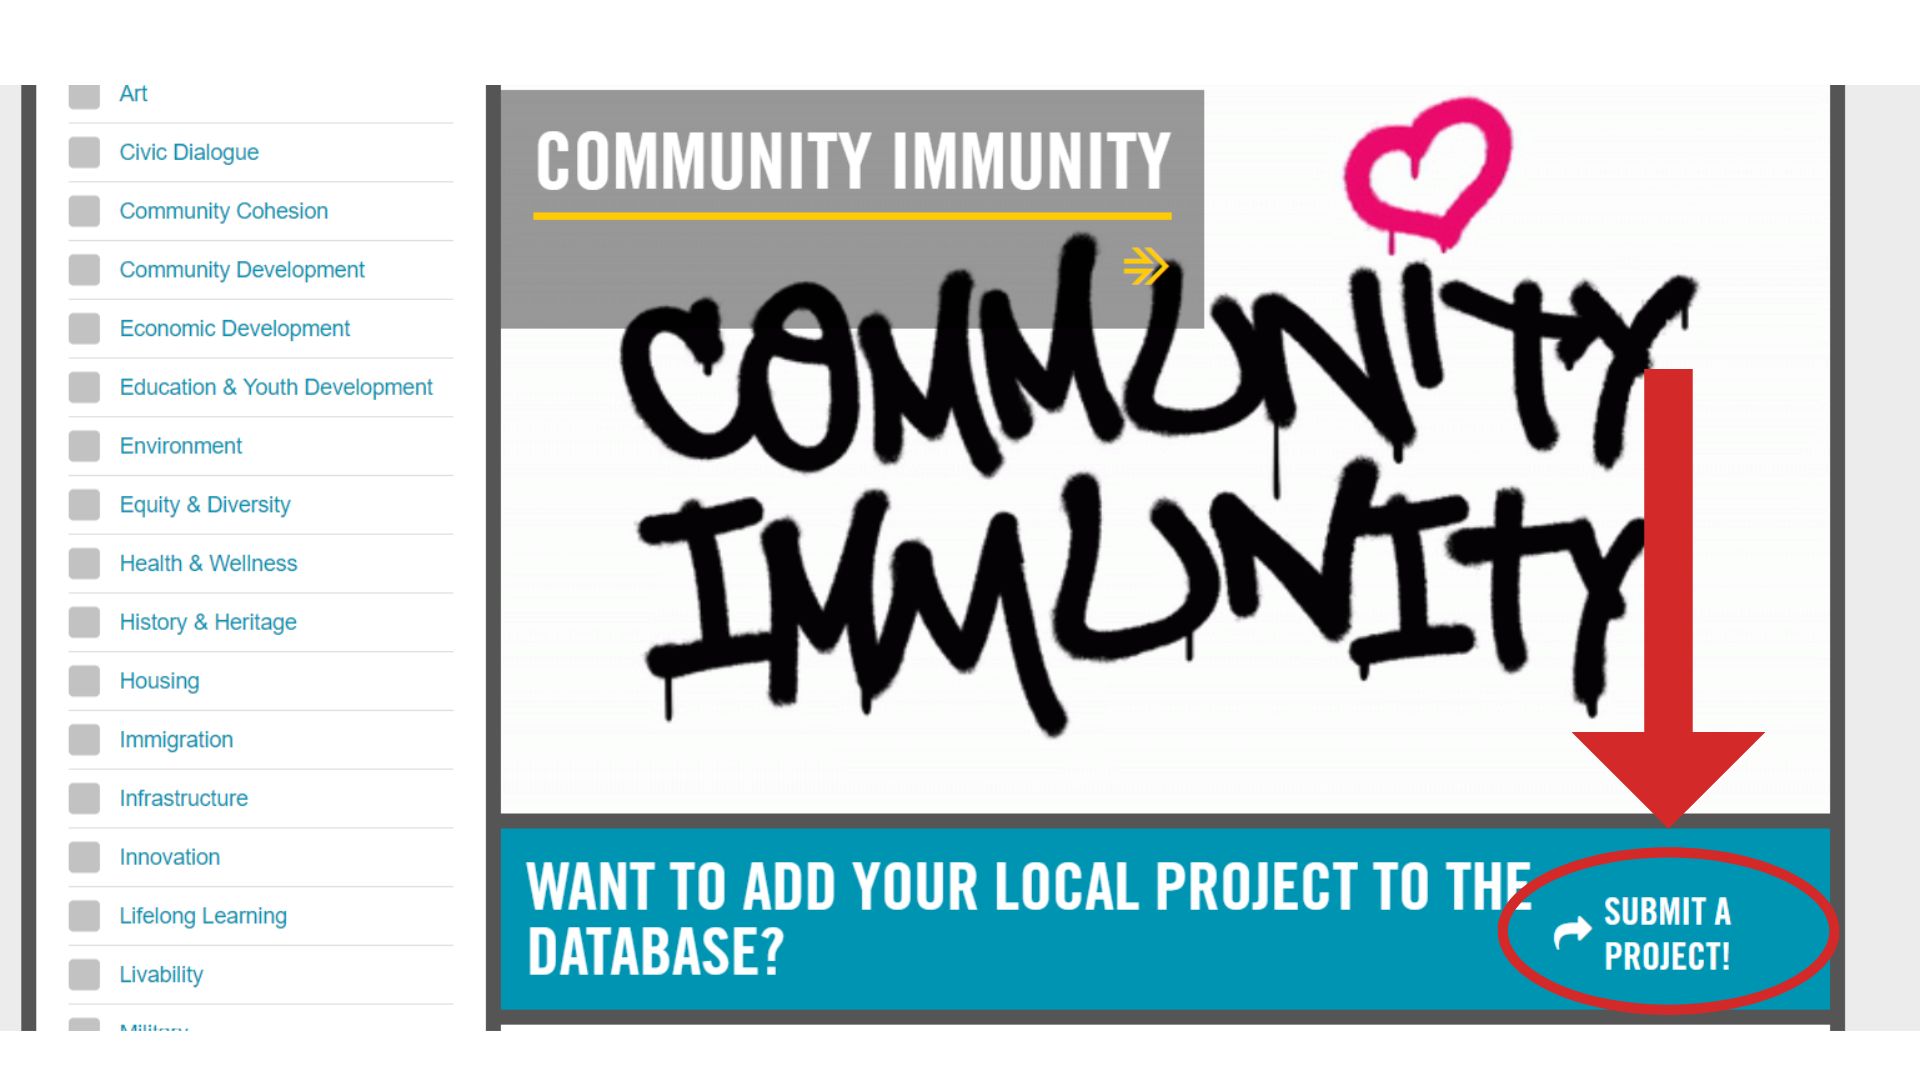 On the left is a list of different topics you can select. On the rest of the page is a large block with an image inside. Below the image is a blue banner with the text 'Want to add your local project to the database?' on the right and on the left, 'Submit a project'. A red arrow points to a red circle encircling the text 'Submit a project'.